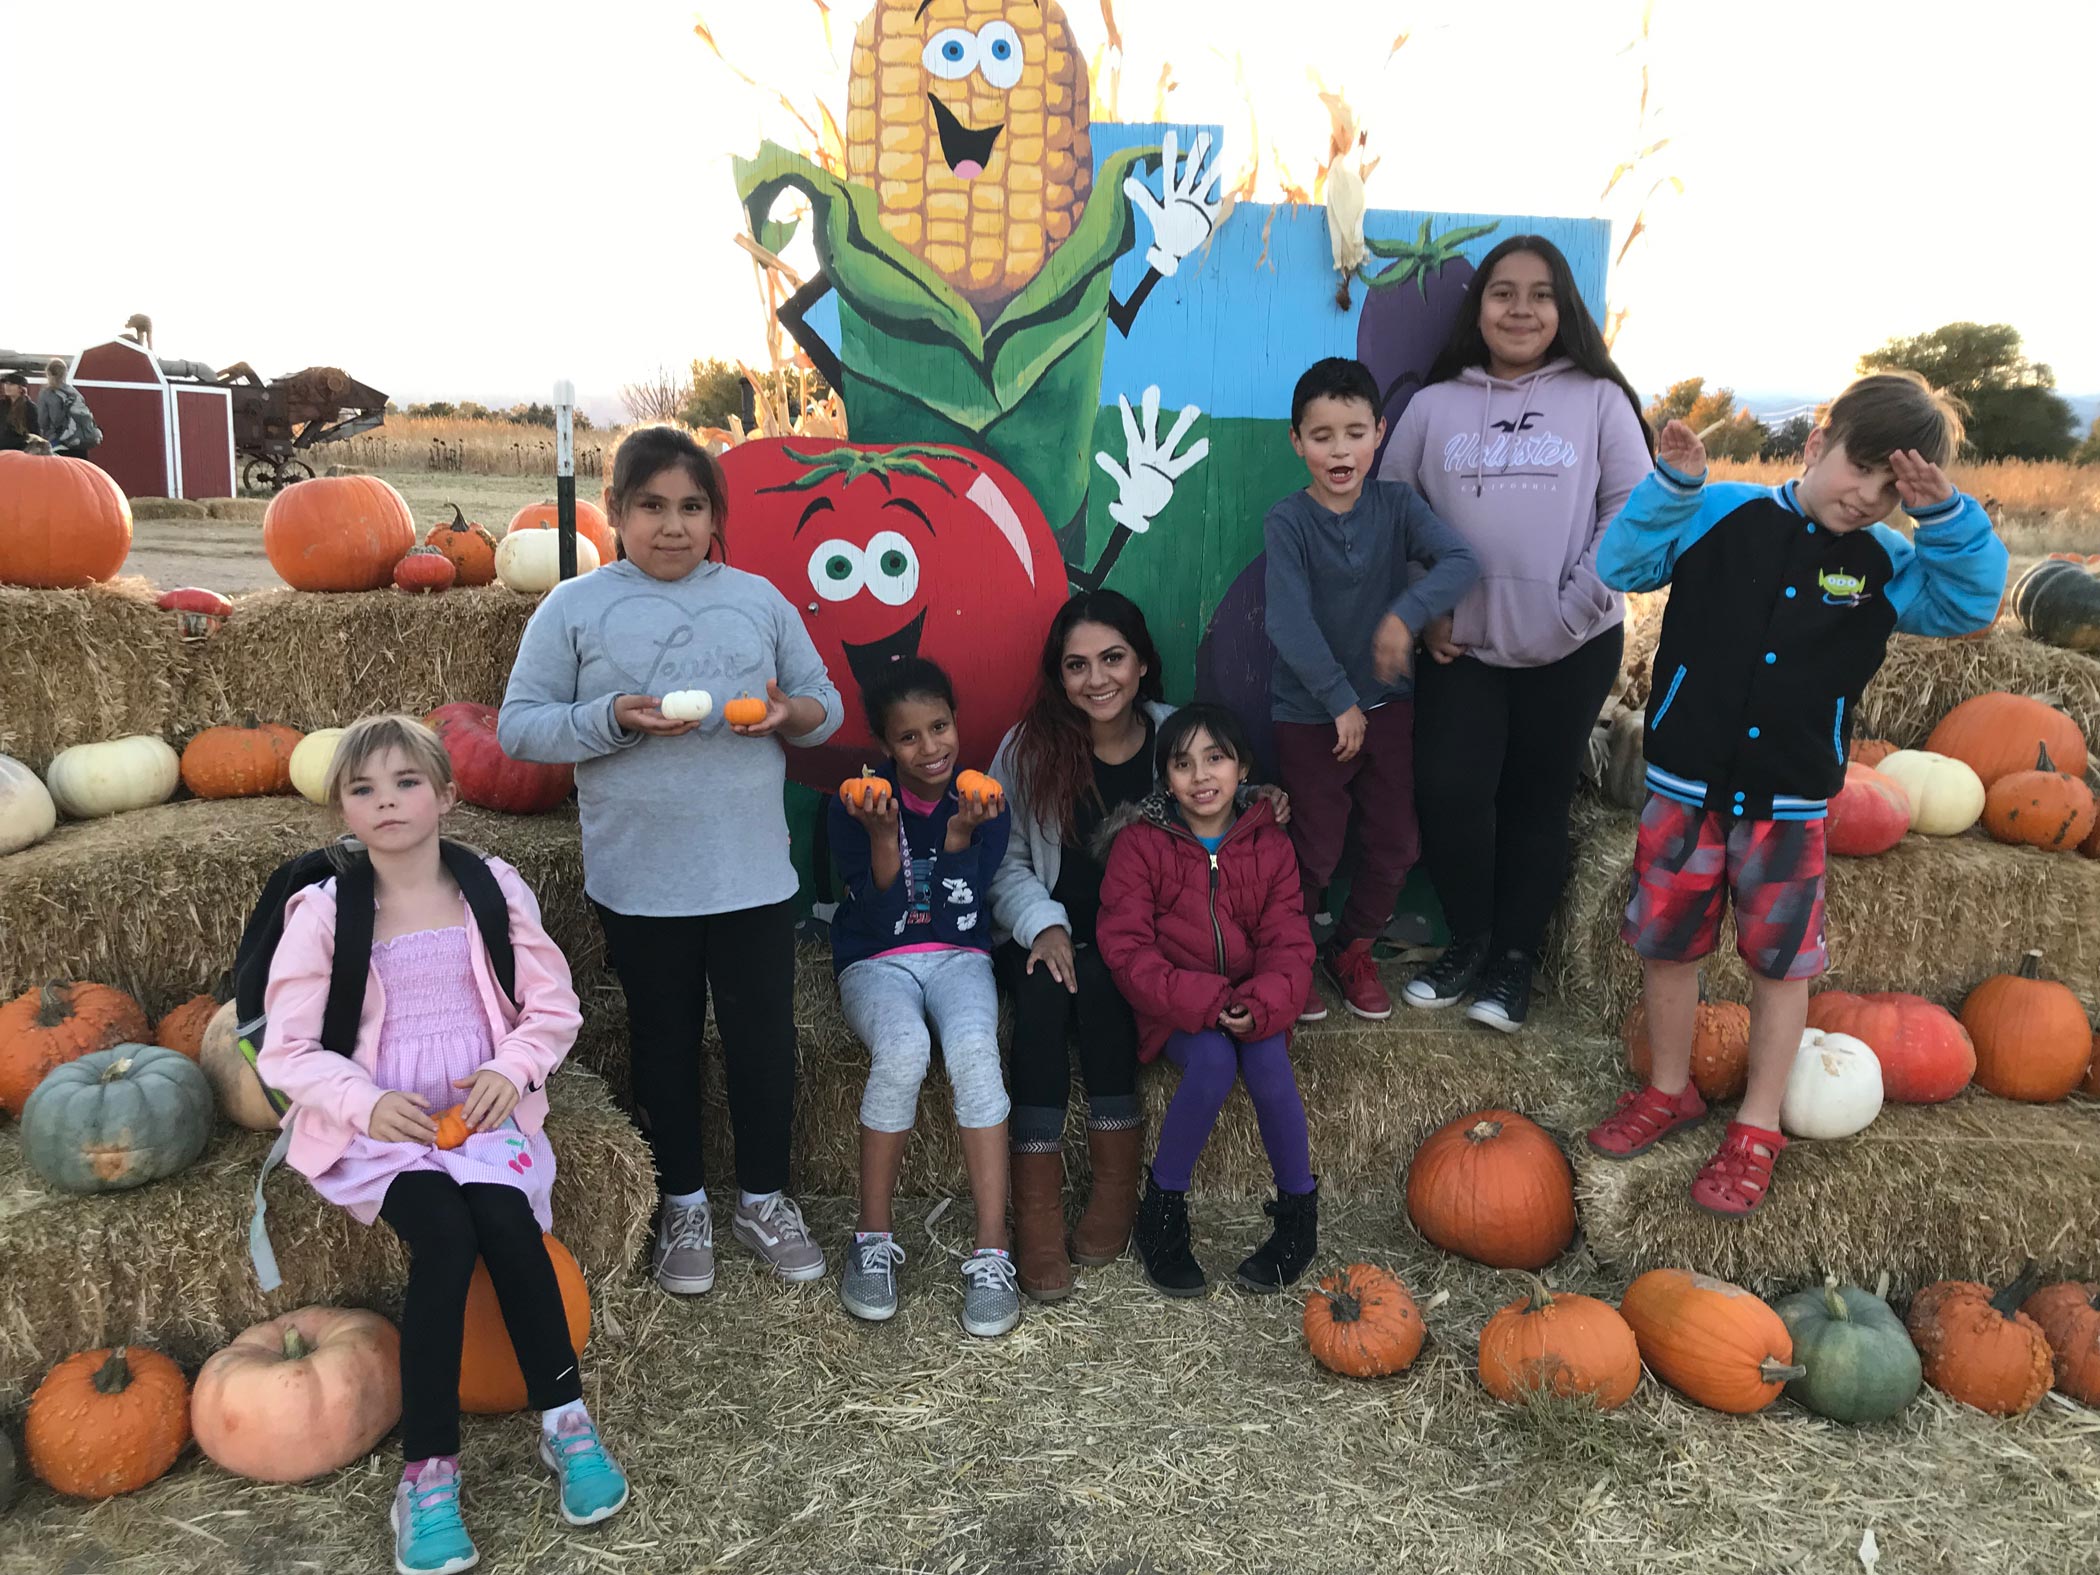 A group of kids pose in front of hay bails and a sign with cartoon vegetables at a pumpkin patch